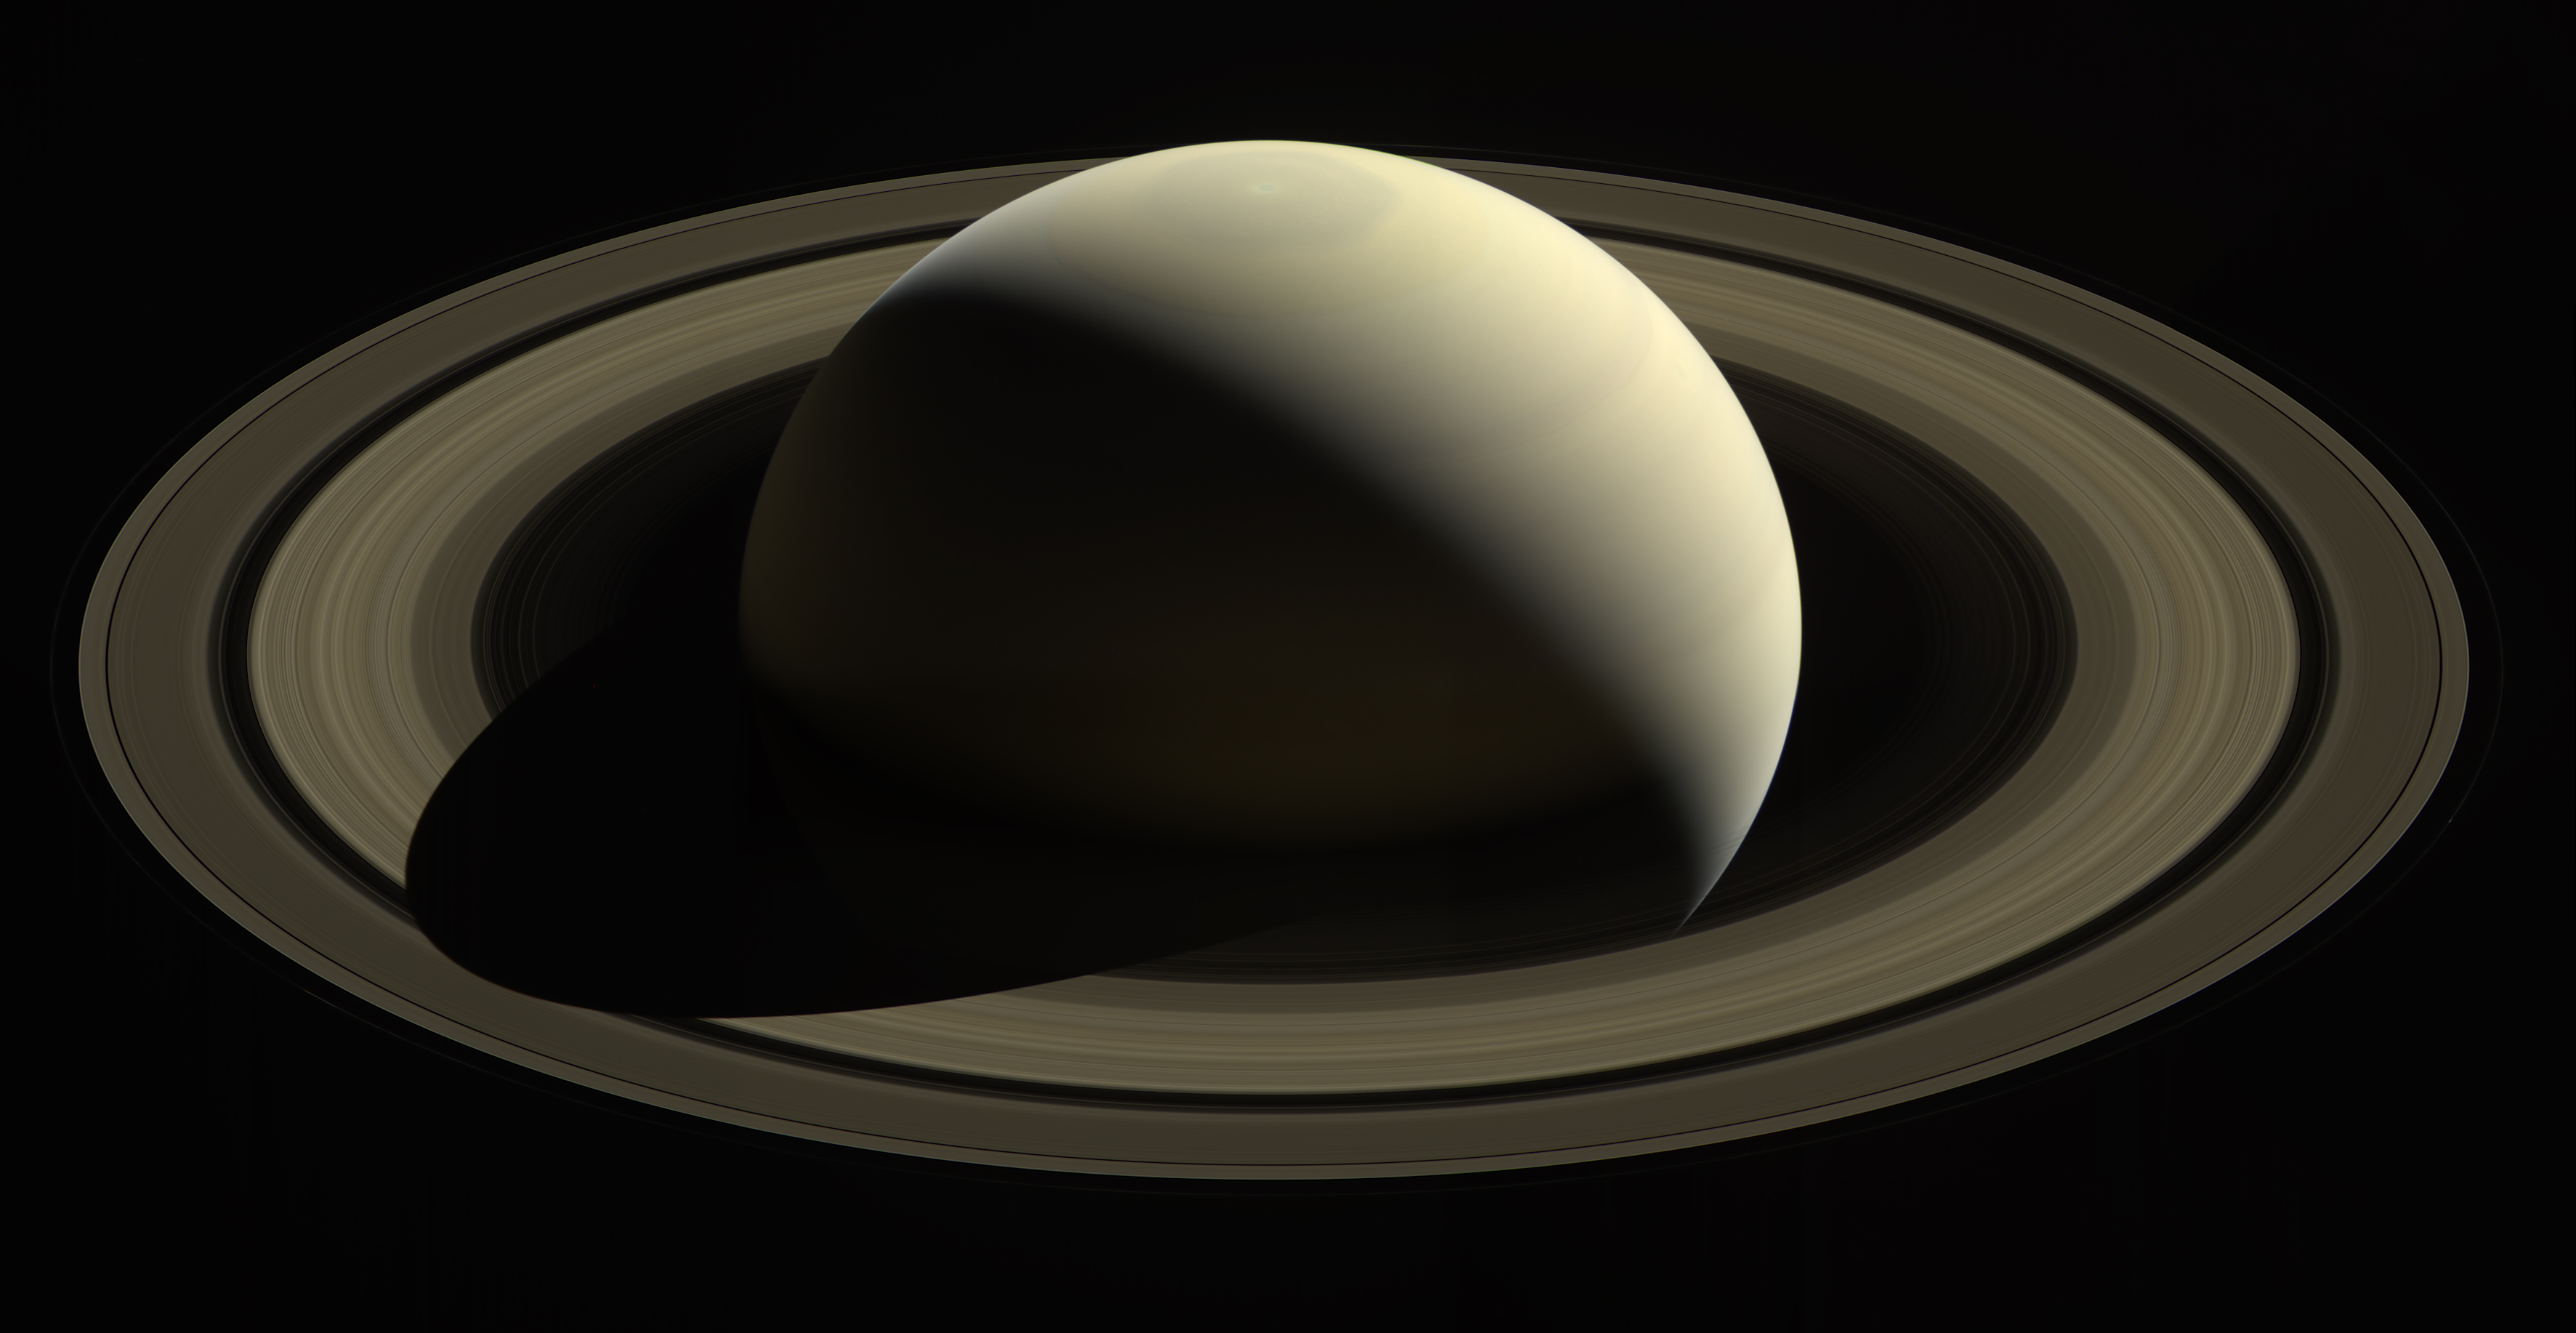 Nine of Cassini's most exciting discoveries about Saturn